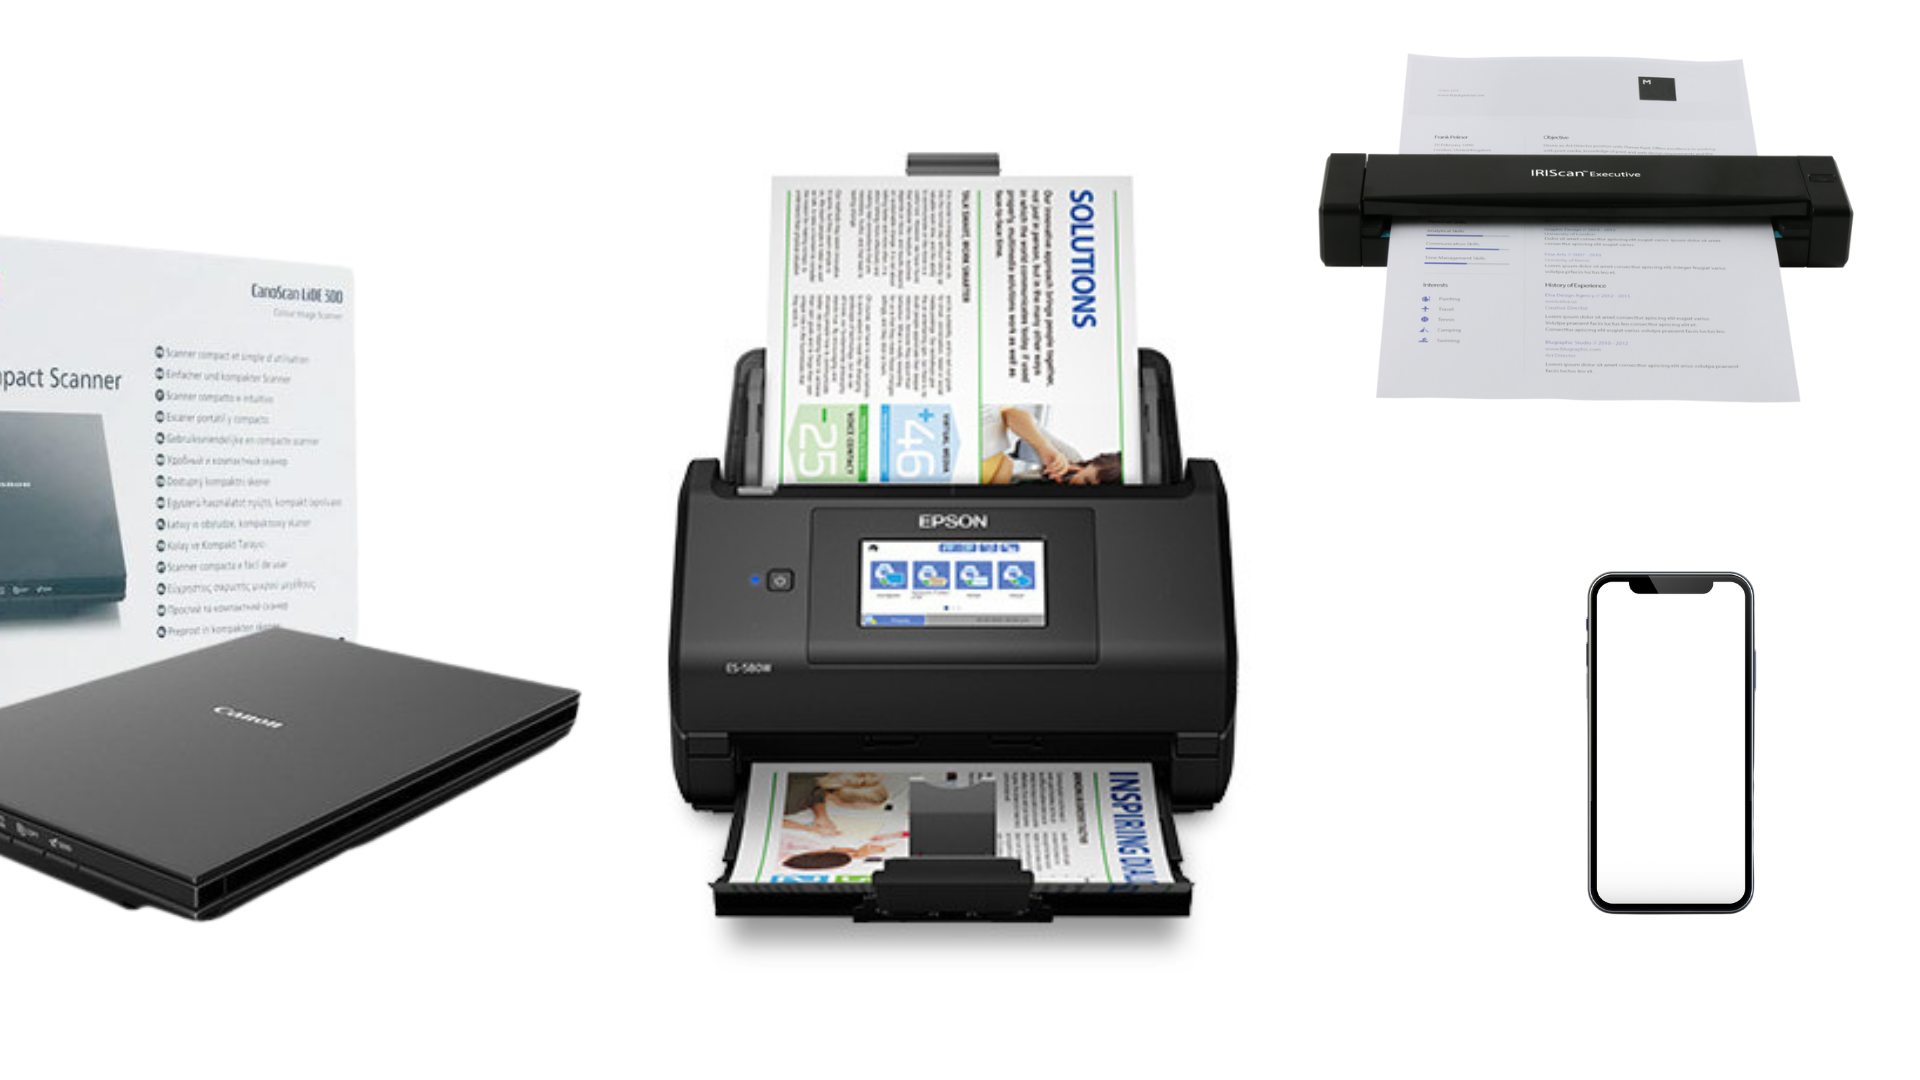 Factors to look out for when buying a document scanner